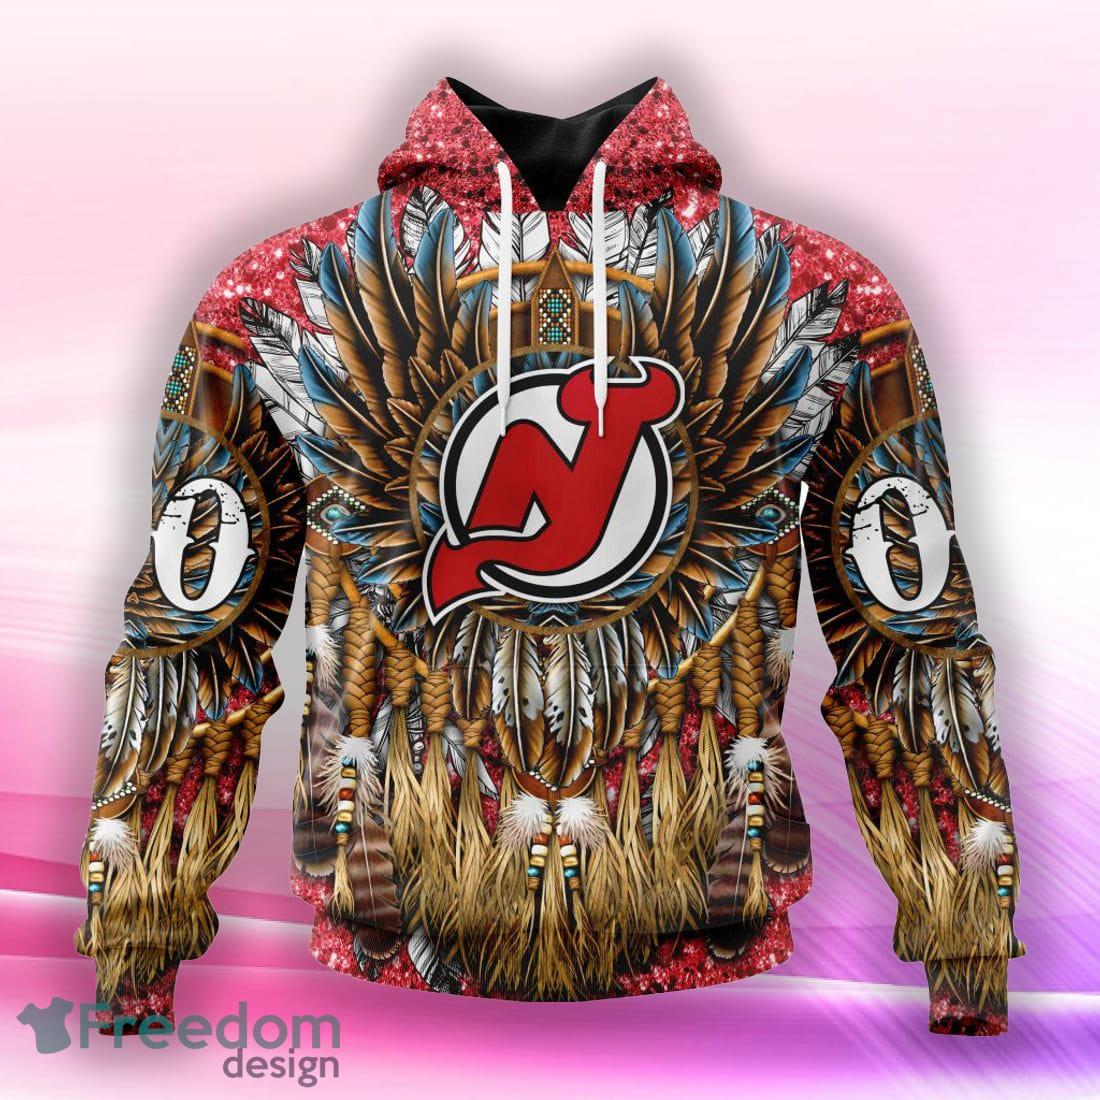 Custom Name & Number NHL Reverse Retro New Jersey Devils Shirt Hoodie 3D -  Bring Your Ideas, Thoughts And Imaginations Into Reality Today